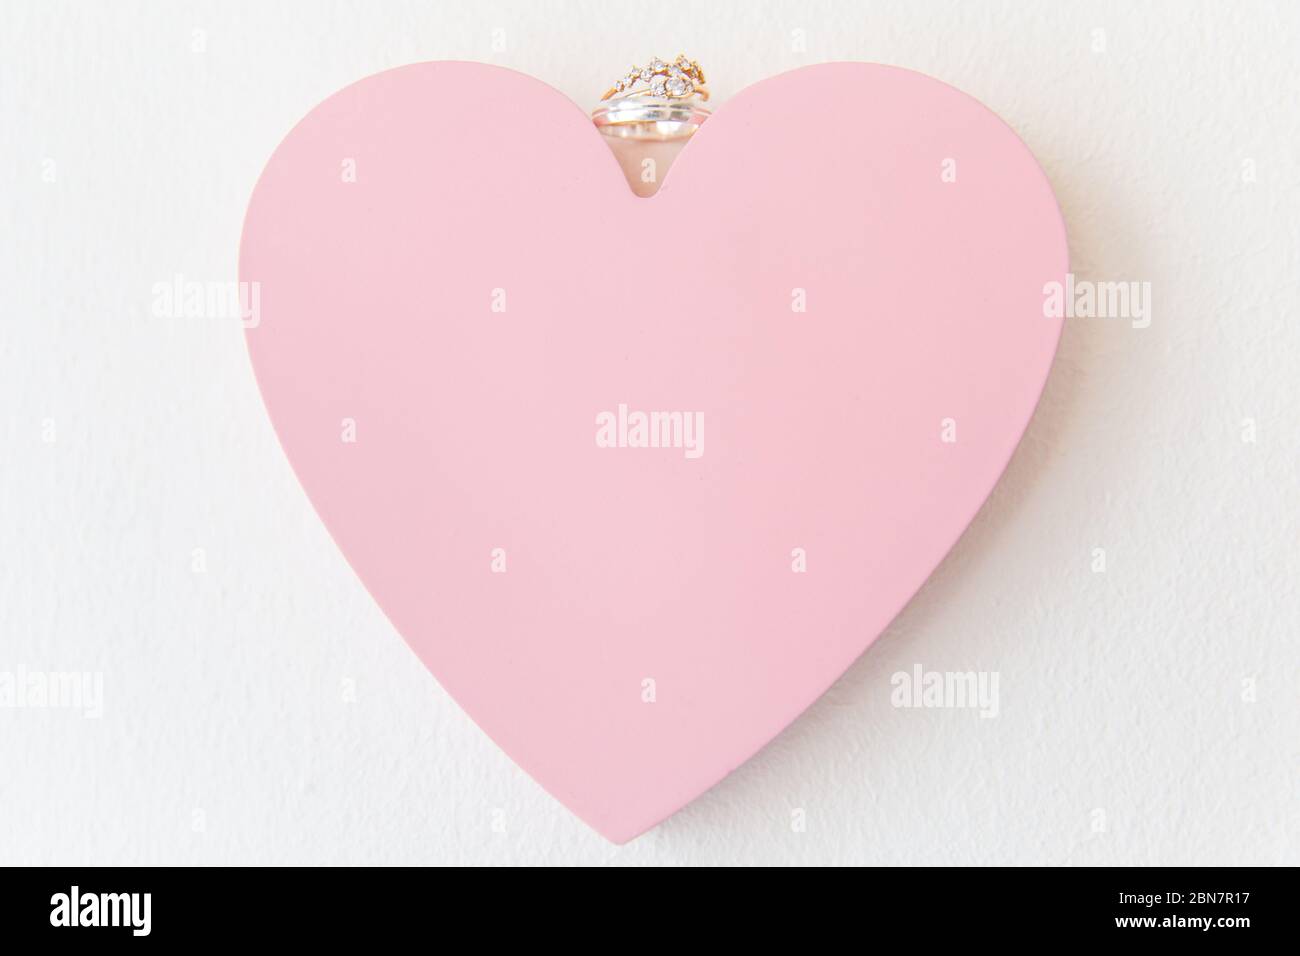 White Gold and Diamonds Wedding Rings on Pink Love Heart Stock Photo